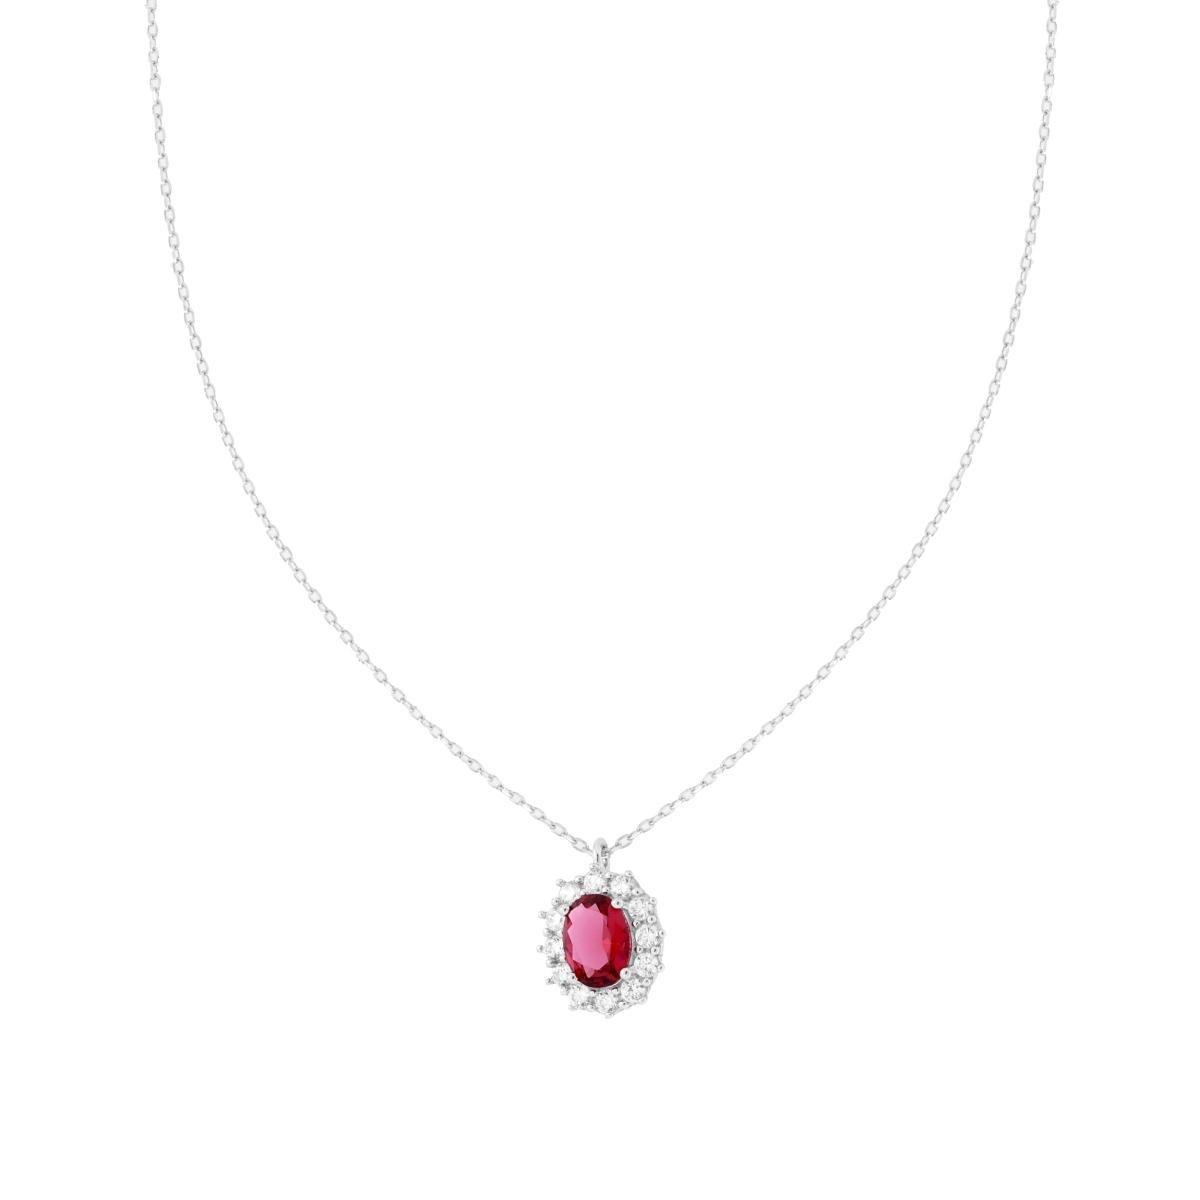 Necklace surrounded by silver with fuchsia stone and zircons - ORO&CO 925